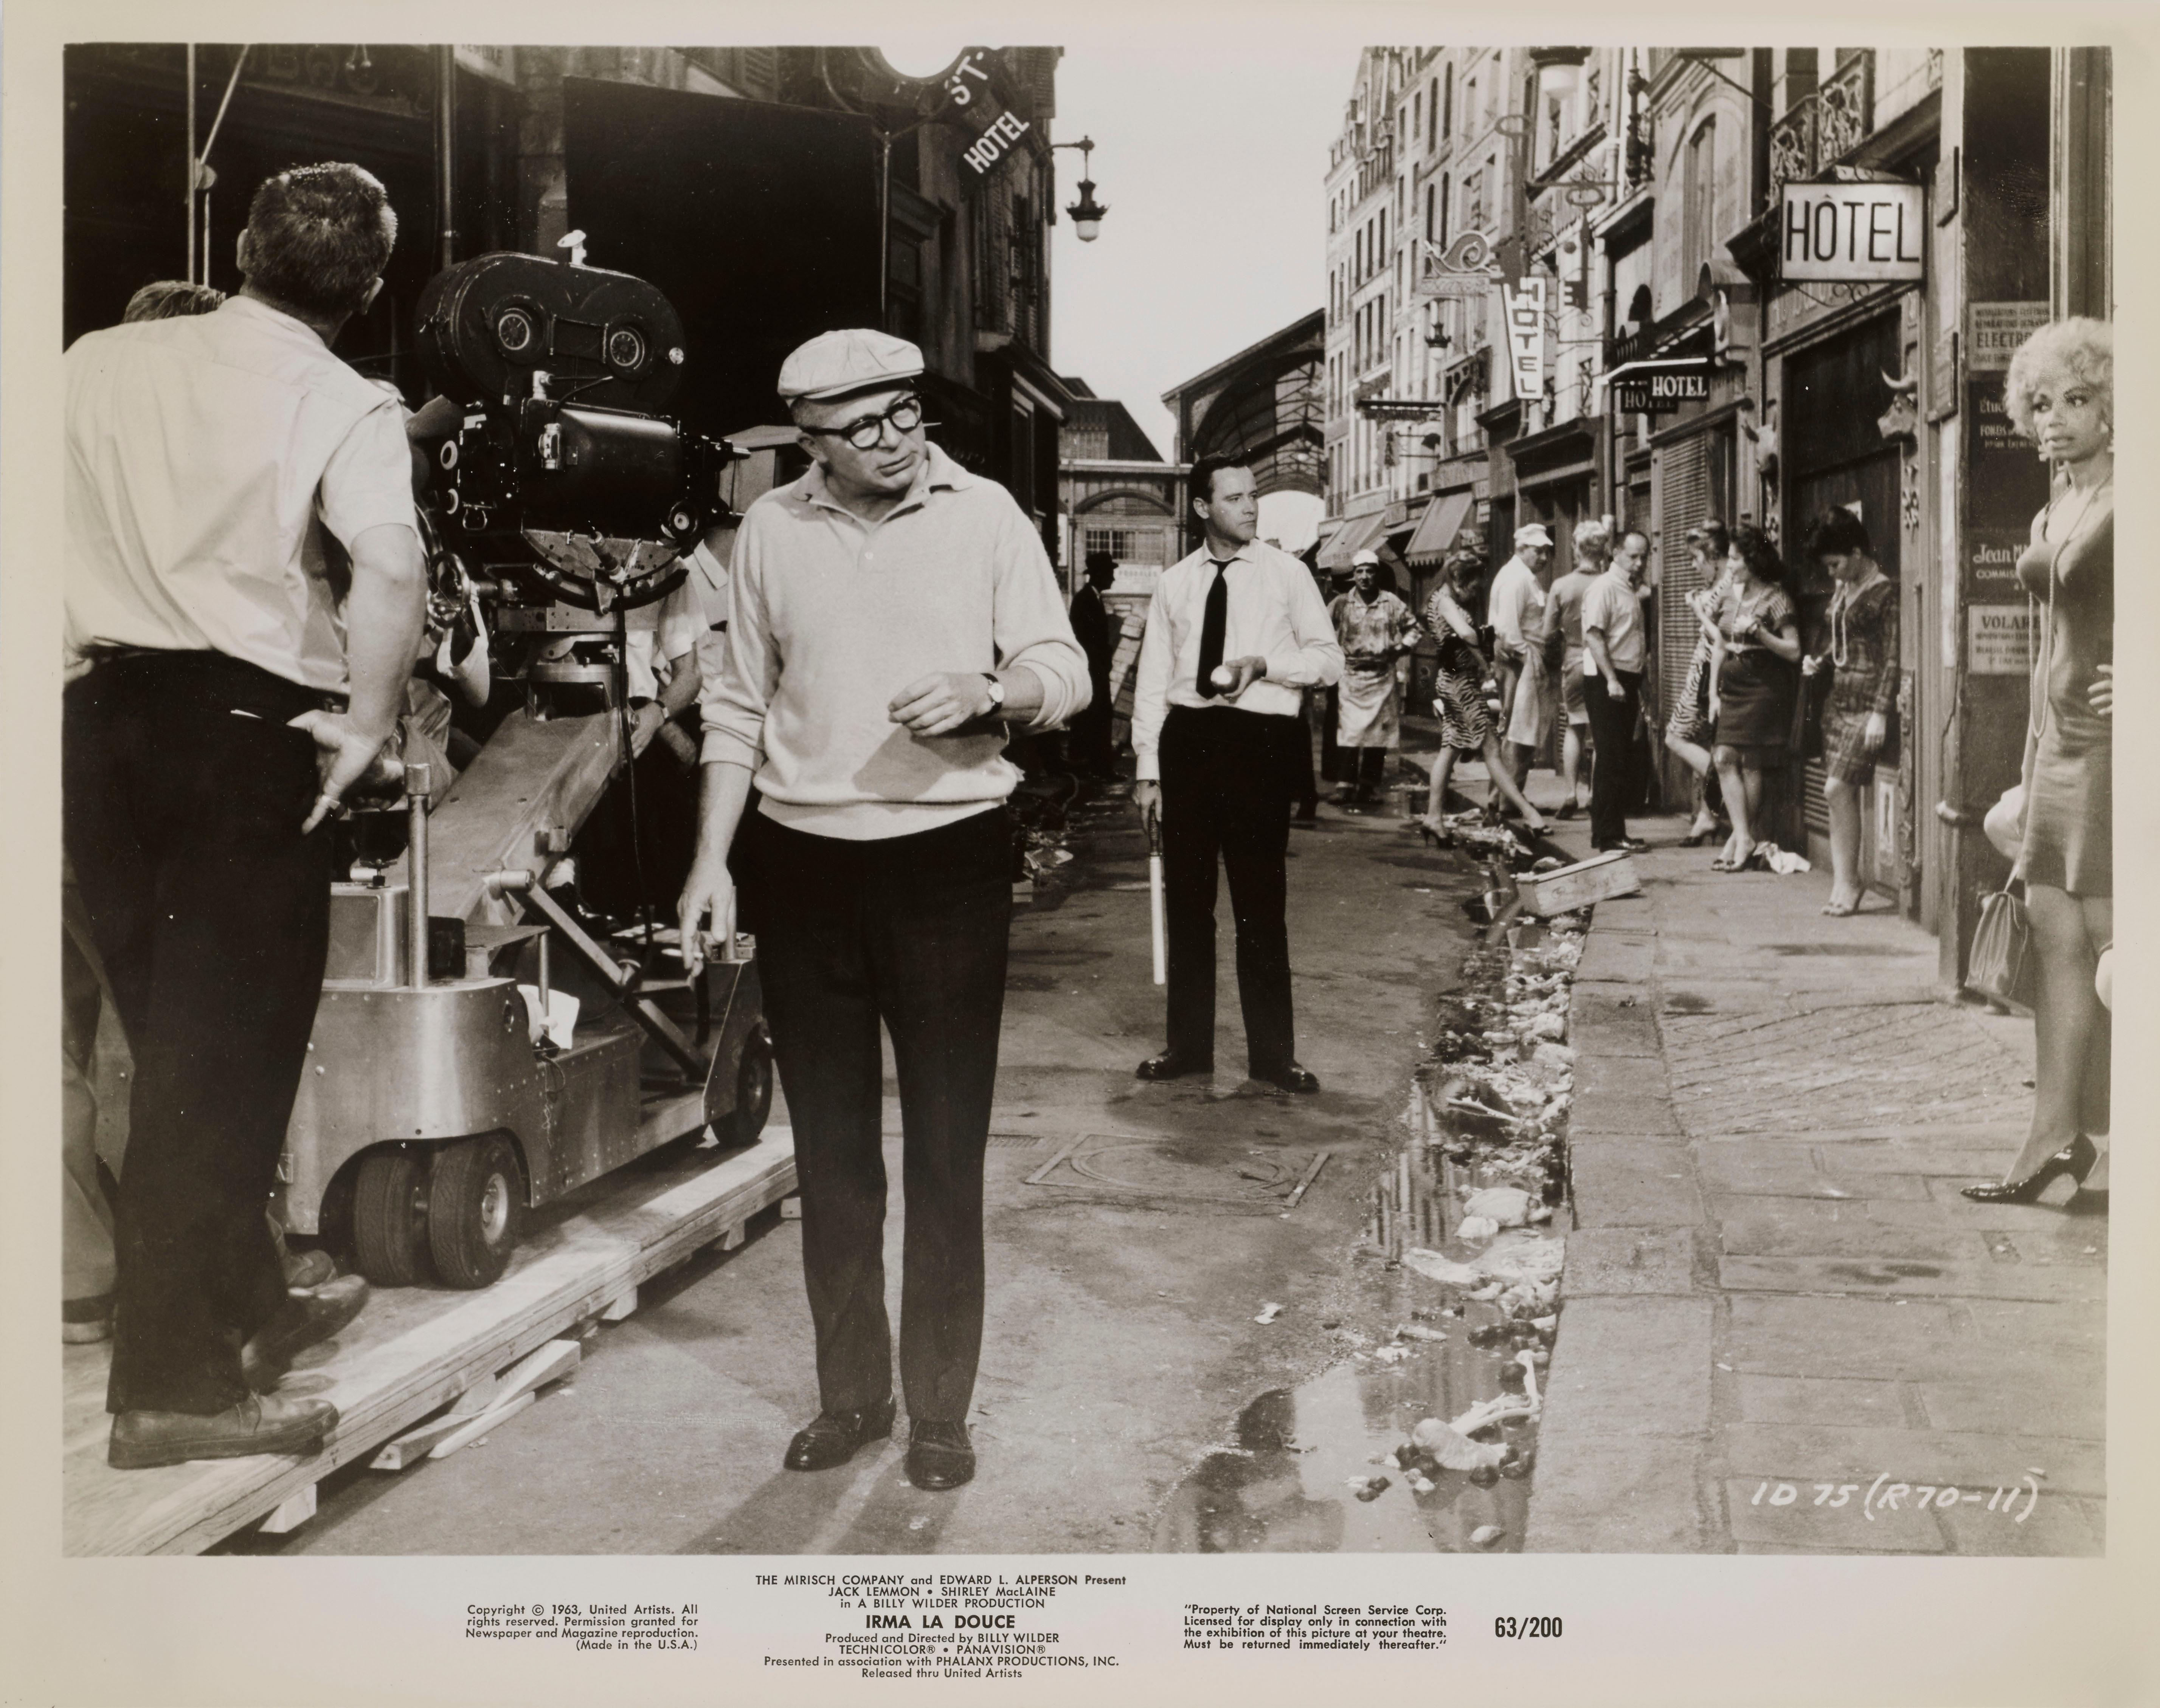 Original US photographic production still from the film Irma La Douce, 1963. Starring Shirley MacLaine, Jack Lemmon and directed by Billy Wilder. This production still shows Billy Wilder on set with Jack Lemmon. The piece would be shipped flat in